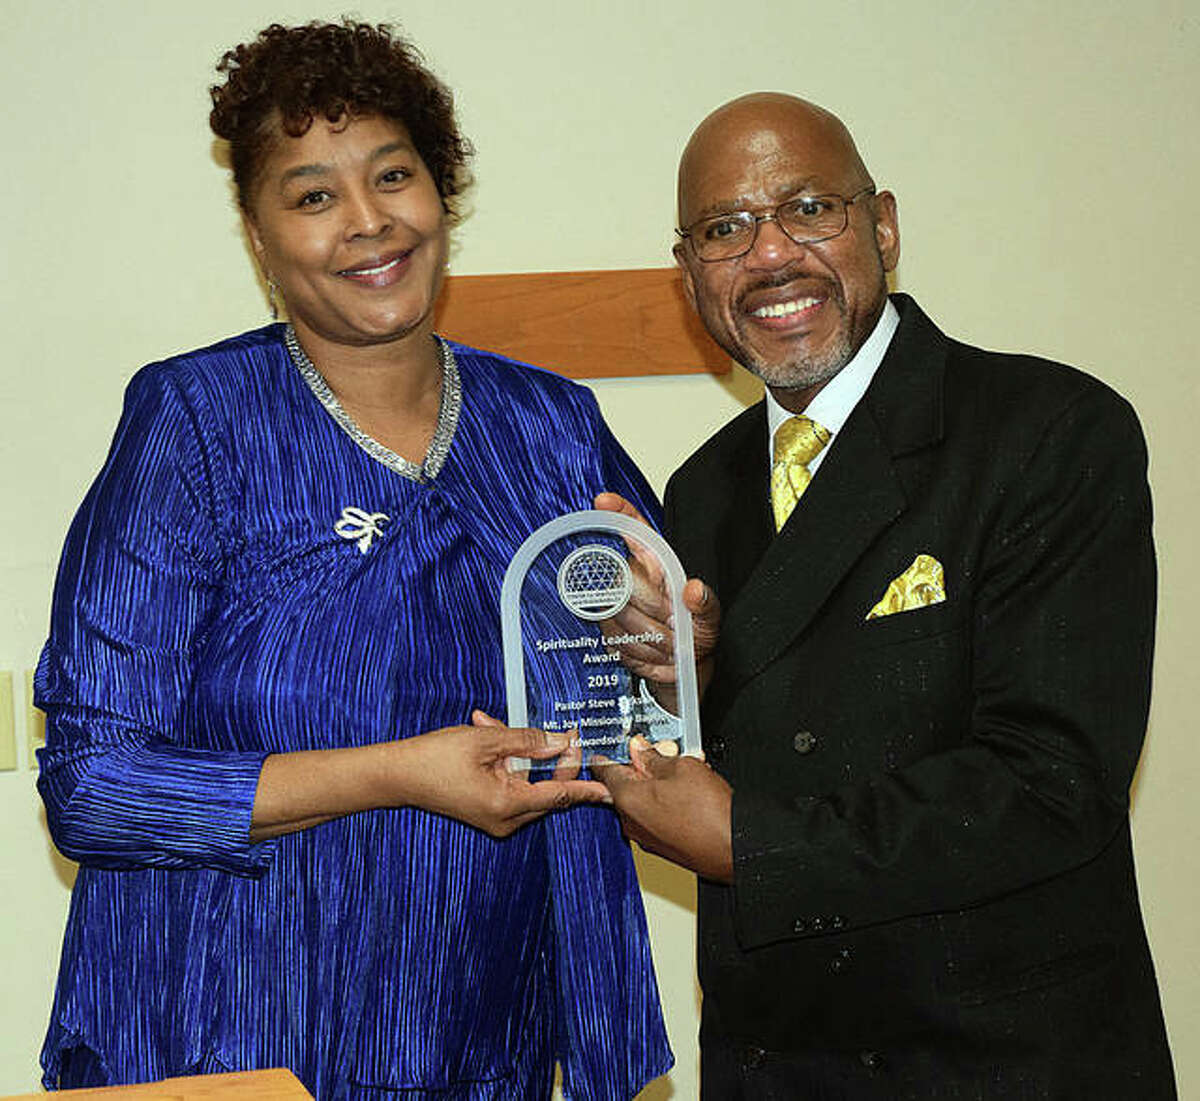 The Center for Spirituality and Sustainability held its 16th annual Leadership Awards Dinner at the Lewis and Clark N. O. Nelson campus on Saturday, March 30. The Spiritual Leadership Award was presented to Rev. Steven Jackson, right, of Edwardsville. Jackson is the minister of the Mt. Joy Missionary Baptist Church in Edwardsville. Dorcas Jackson, left, Center for Spirituality and Sustainability Board Member, presented the award.